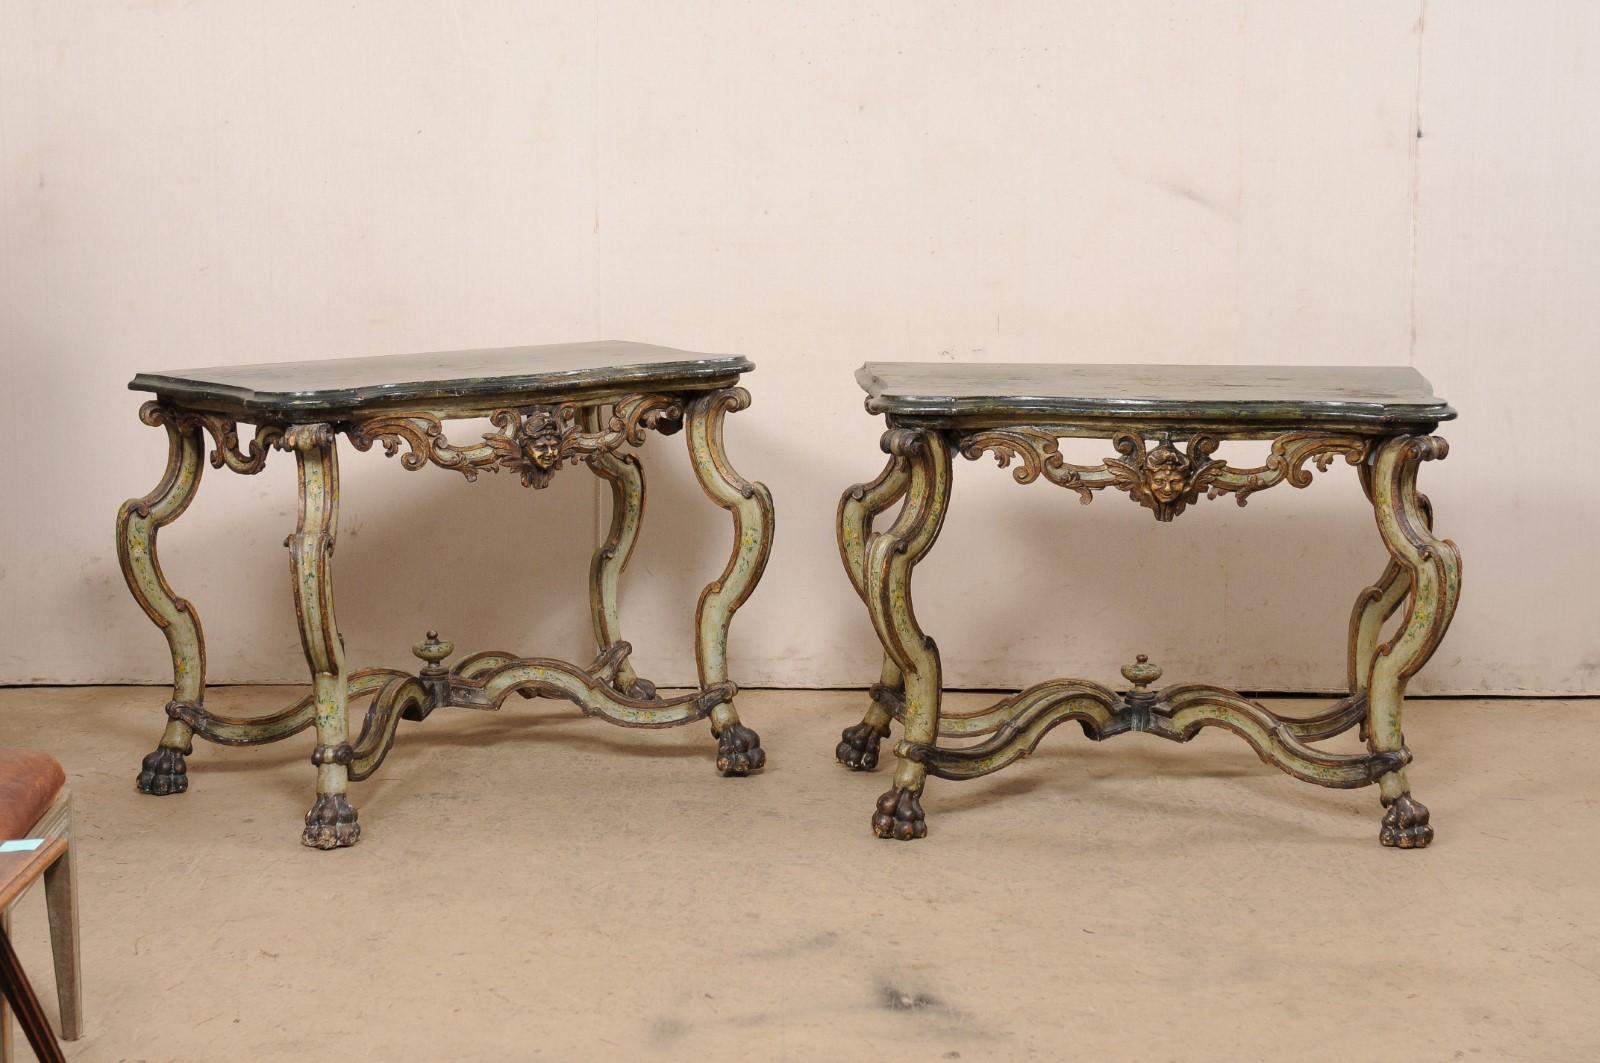 An Italian Venetian pair of ornately carved and painted wood console tables from the 18th century. This antique pair of Venetian tables from Italy have been designed with elaborate and curvaceous details. Each featuring tops with serpentine shaped